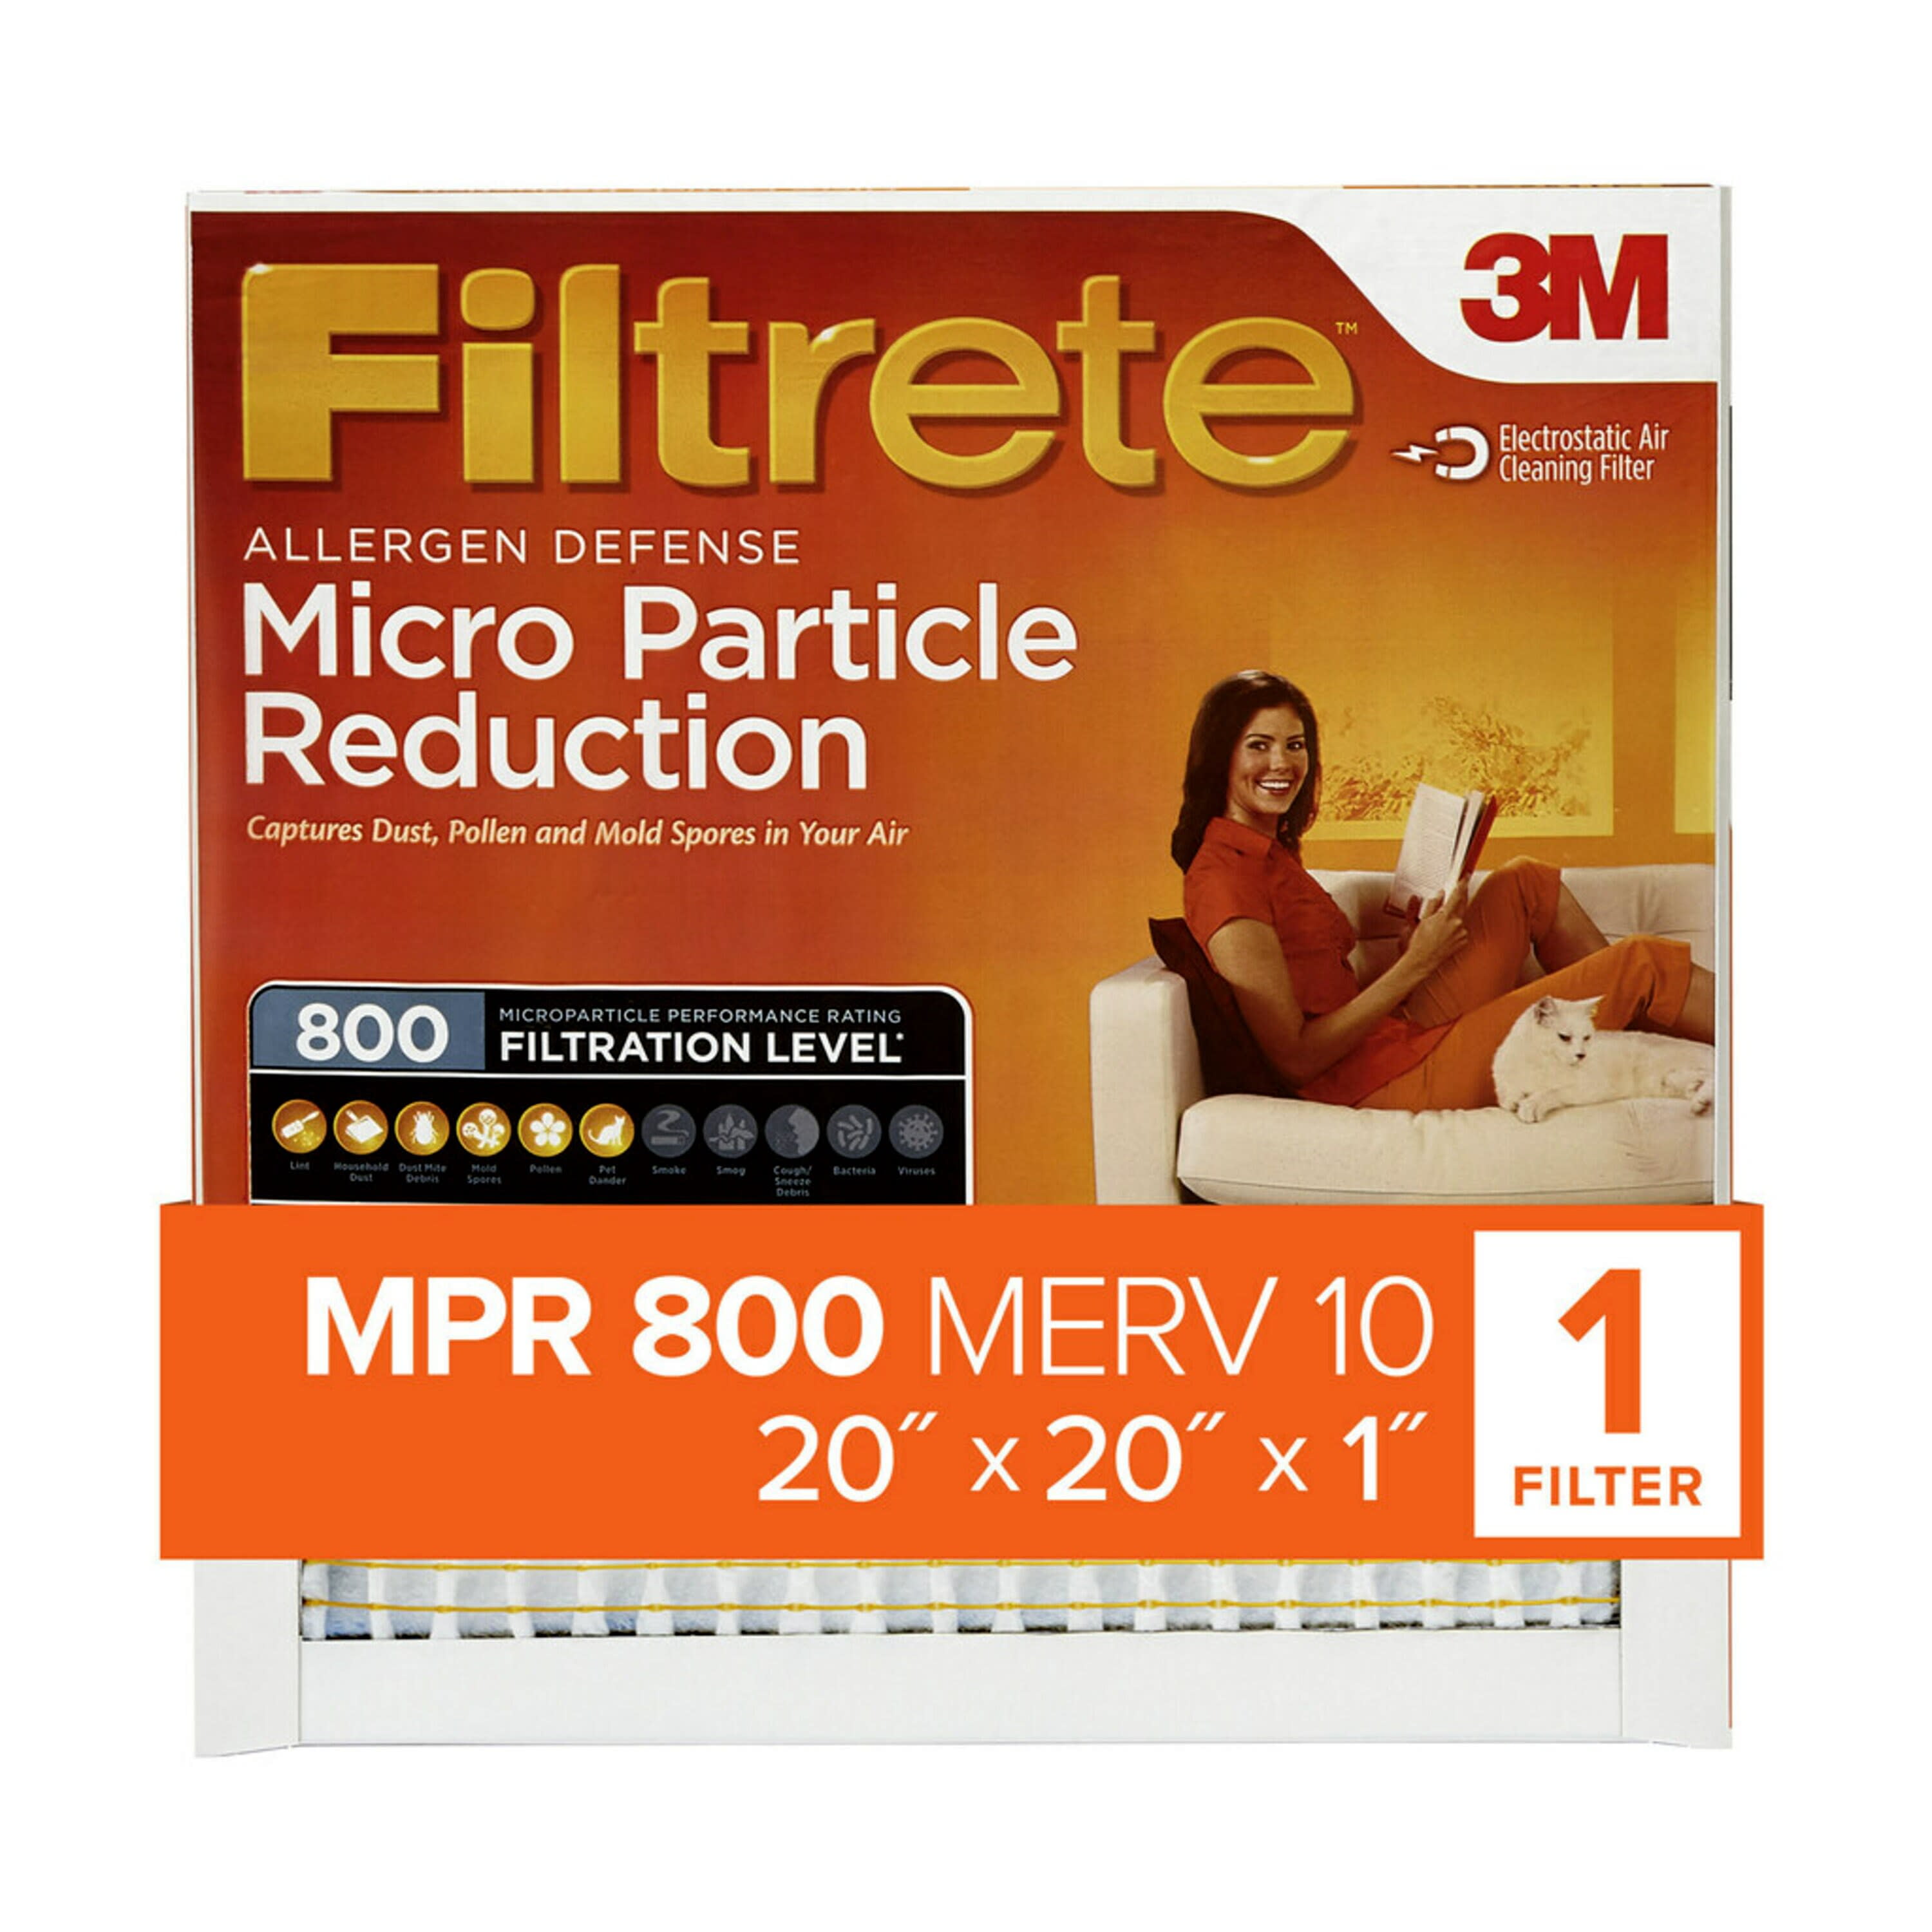 Filtrete by 3M, 20x20x1, MERV 10, Micro Particle Reduction HVAC Furnace Air Filter, Captures Pet Dander and Pollen, 800 MPR, 1 Filter